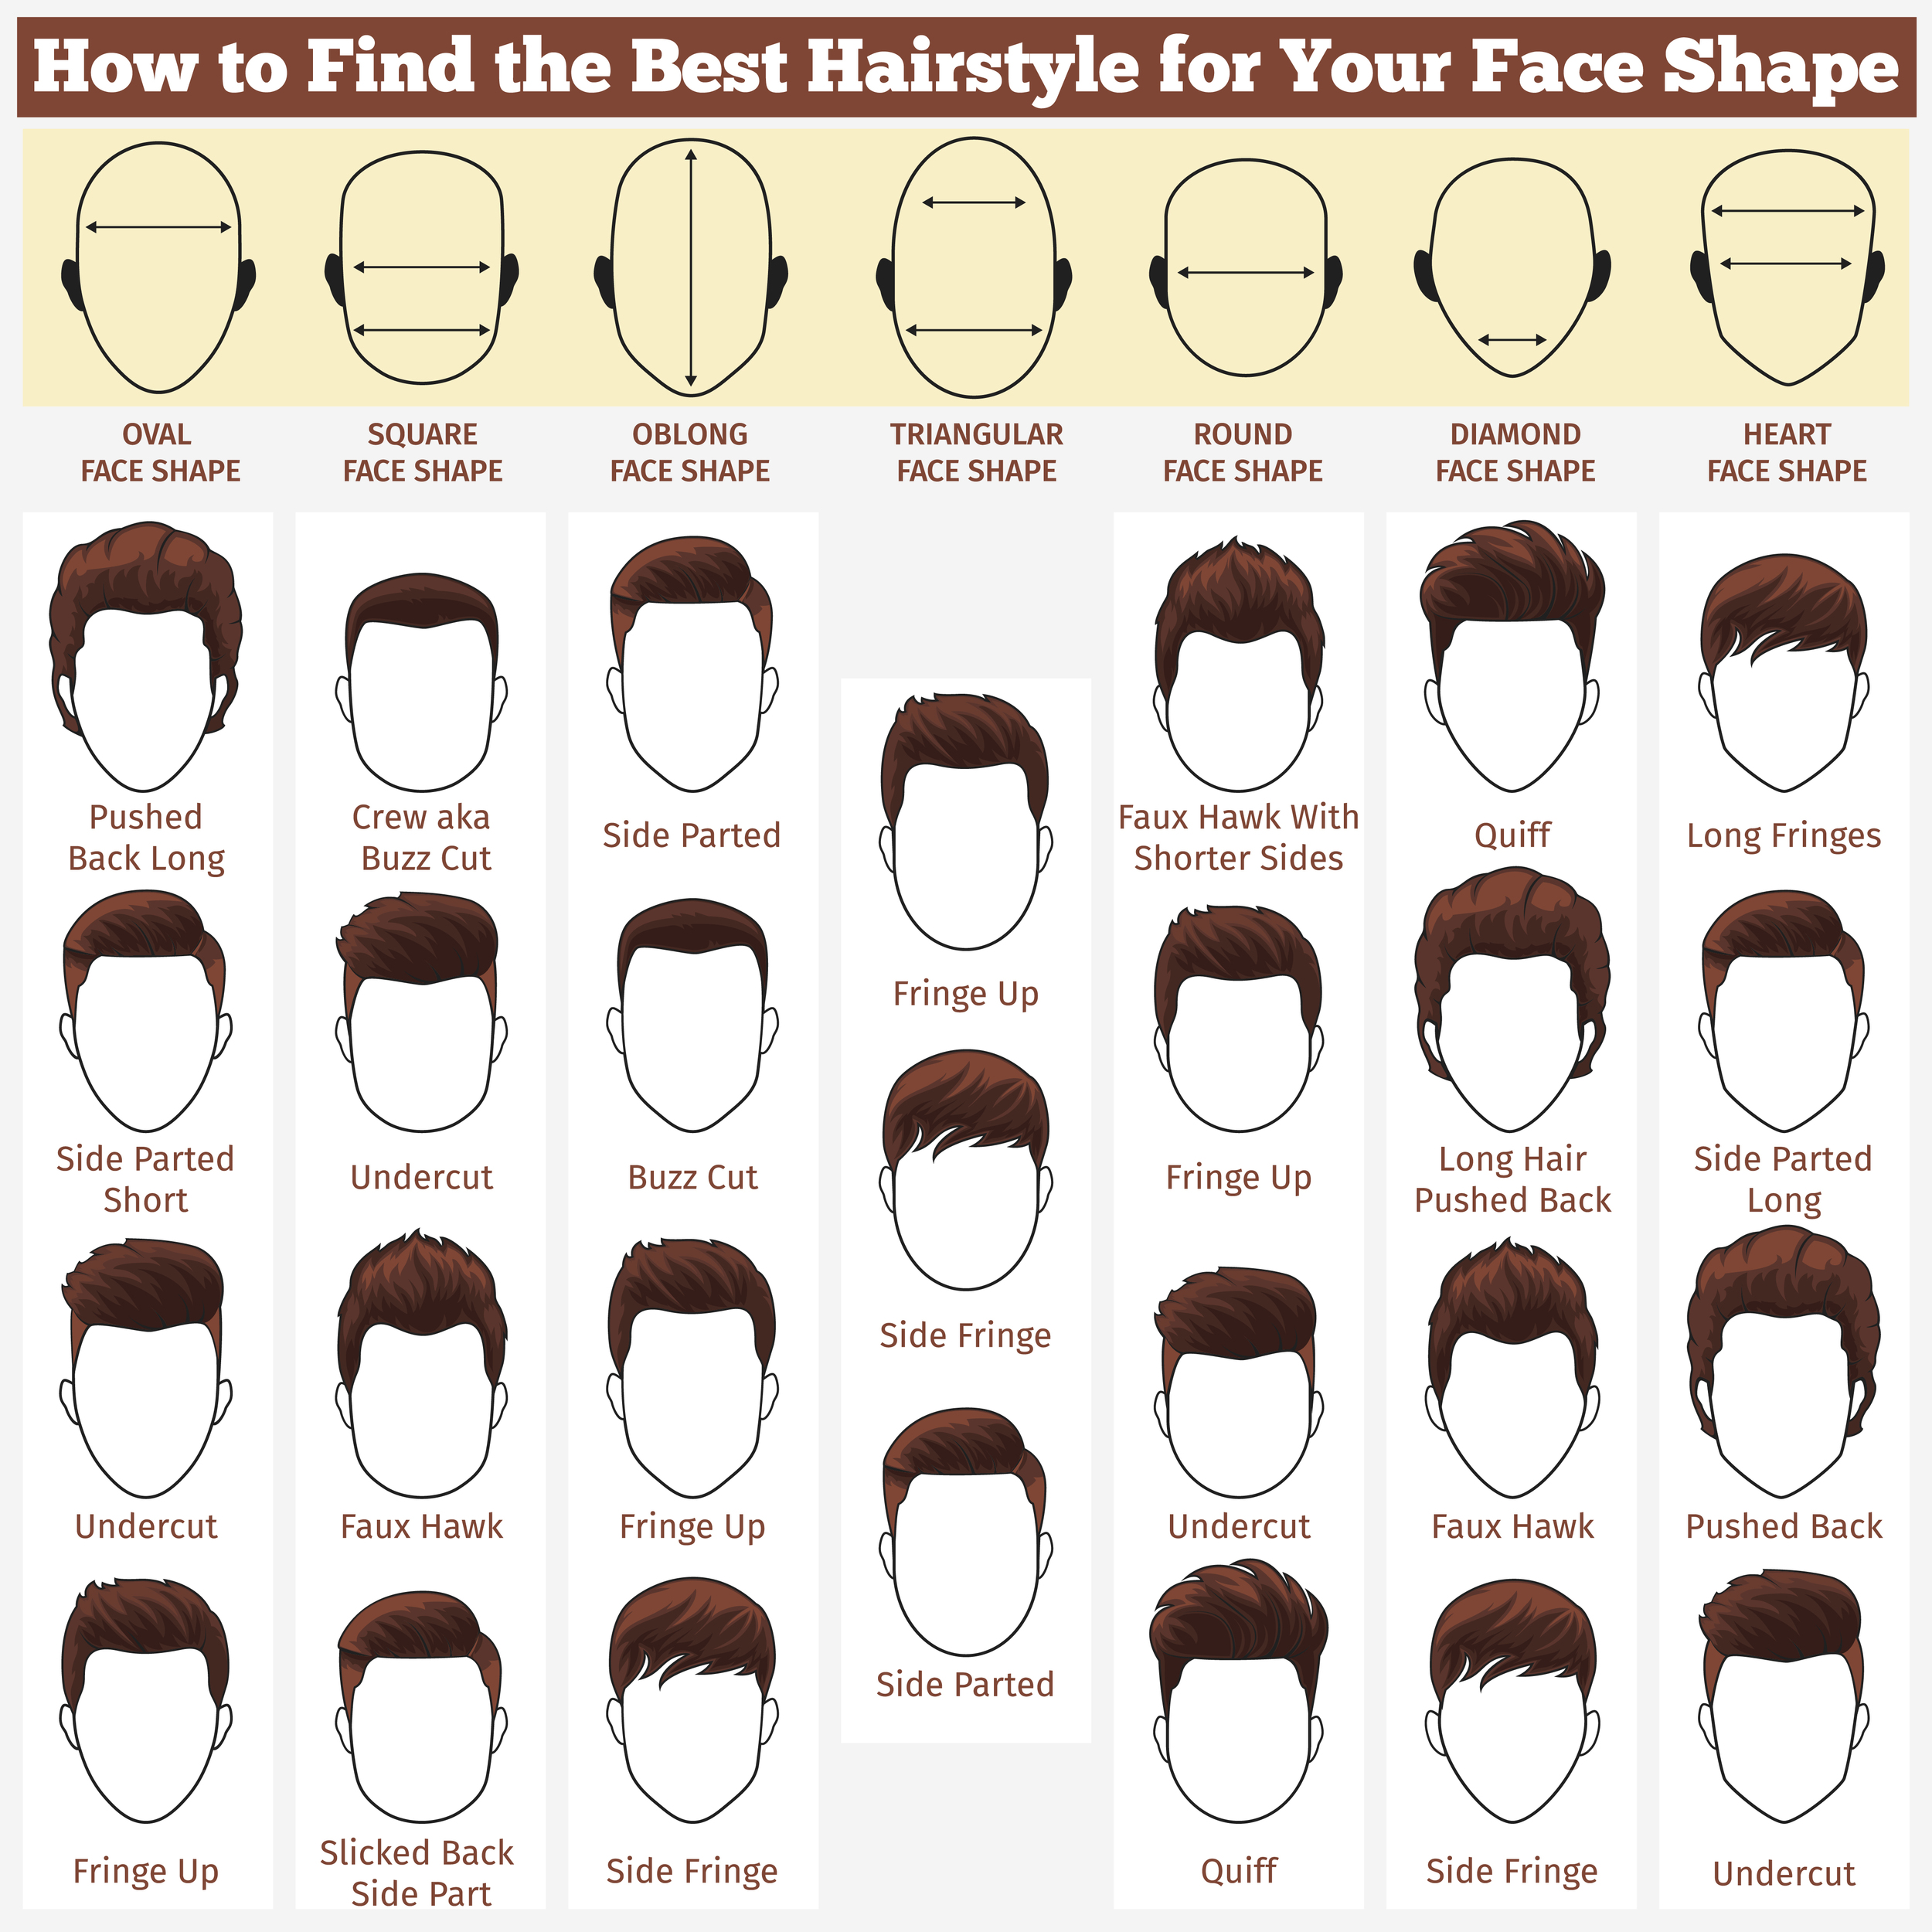 How to Get a New Men's Haircut